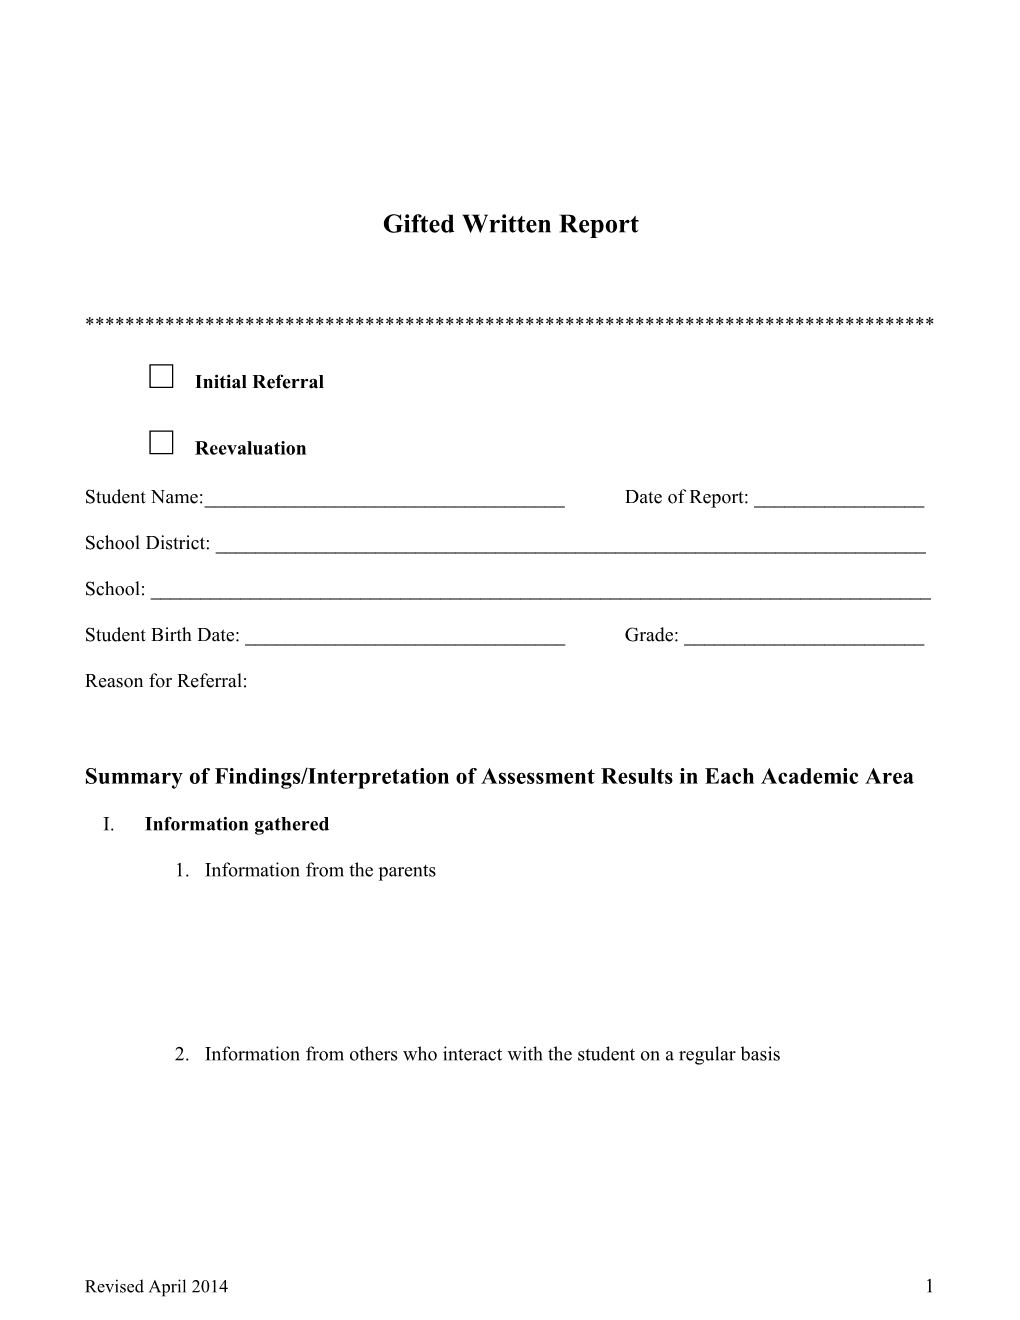 Gifted Written Report